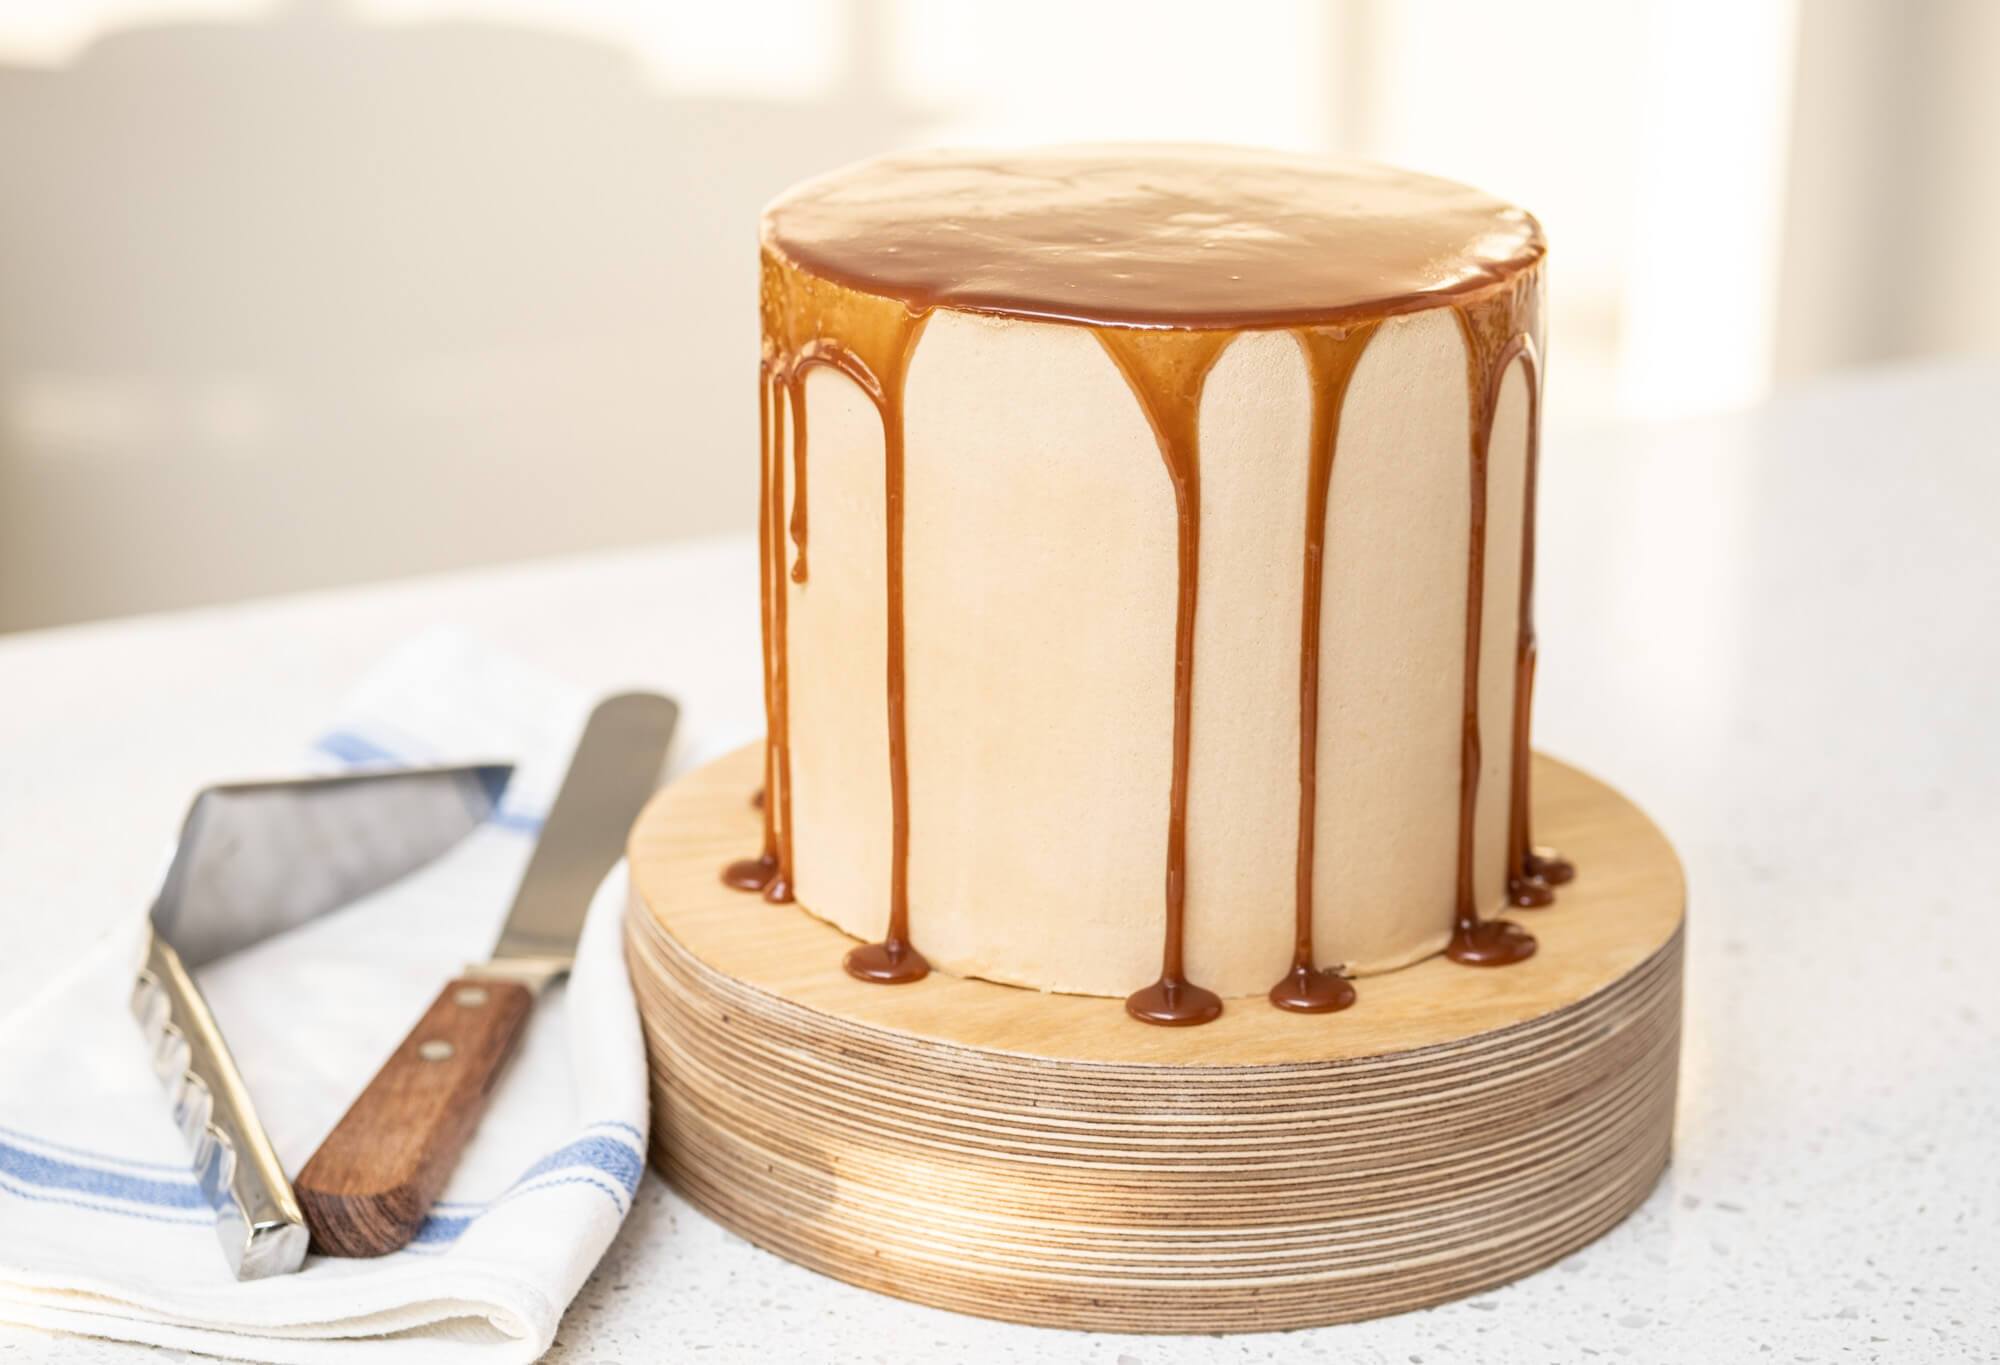 Caramel apple cheesecake cake with caramel drizzle on a wooden cake stand